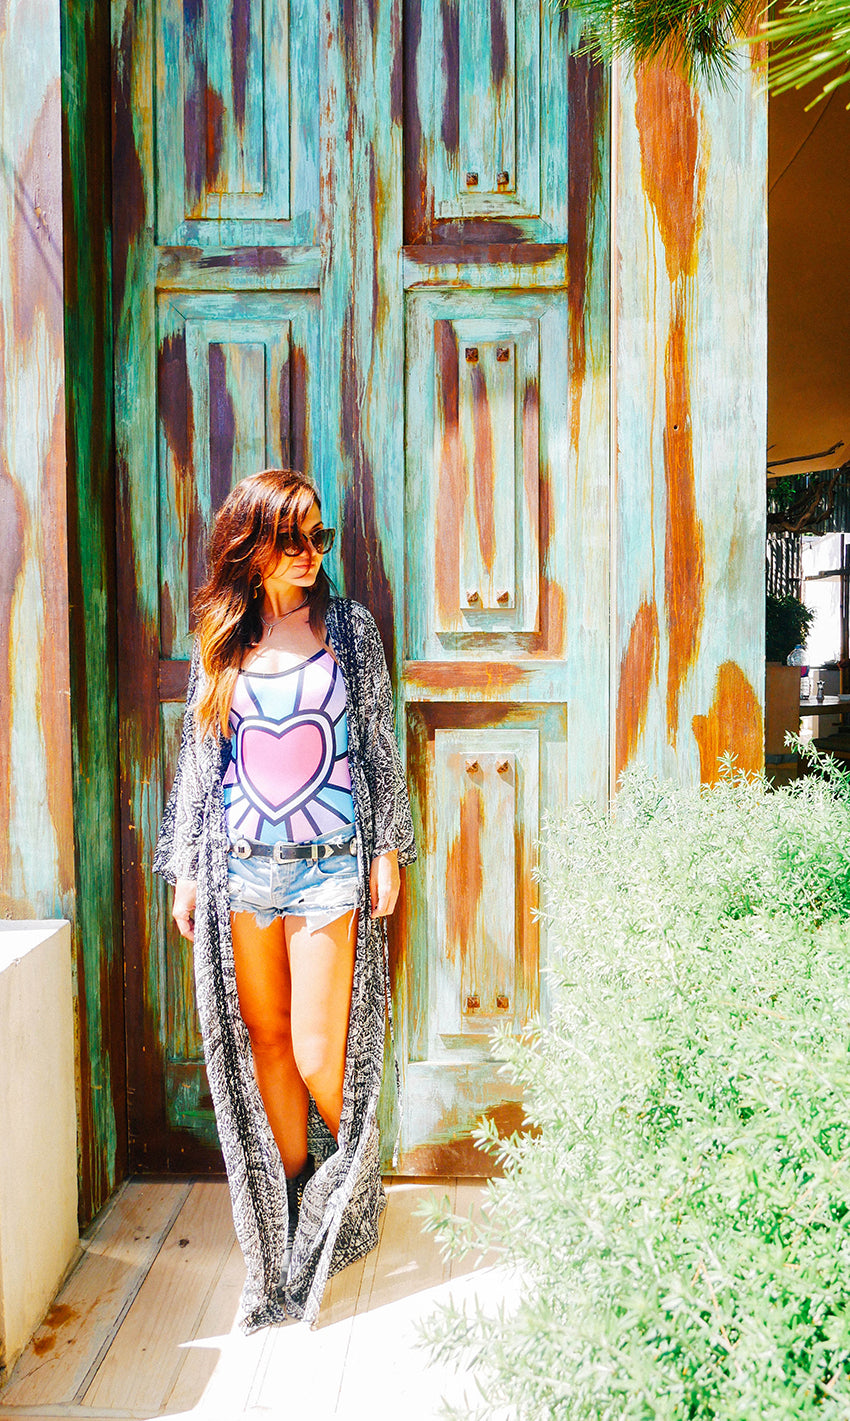 Kate Marron stood in front of an old green painted wooden door